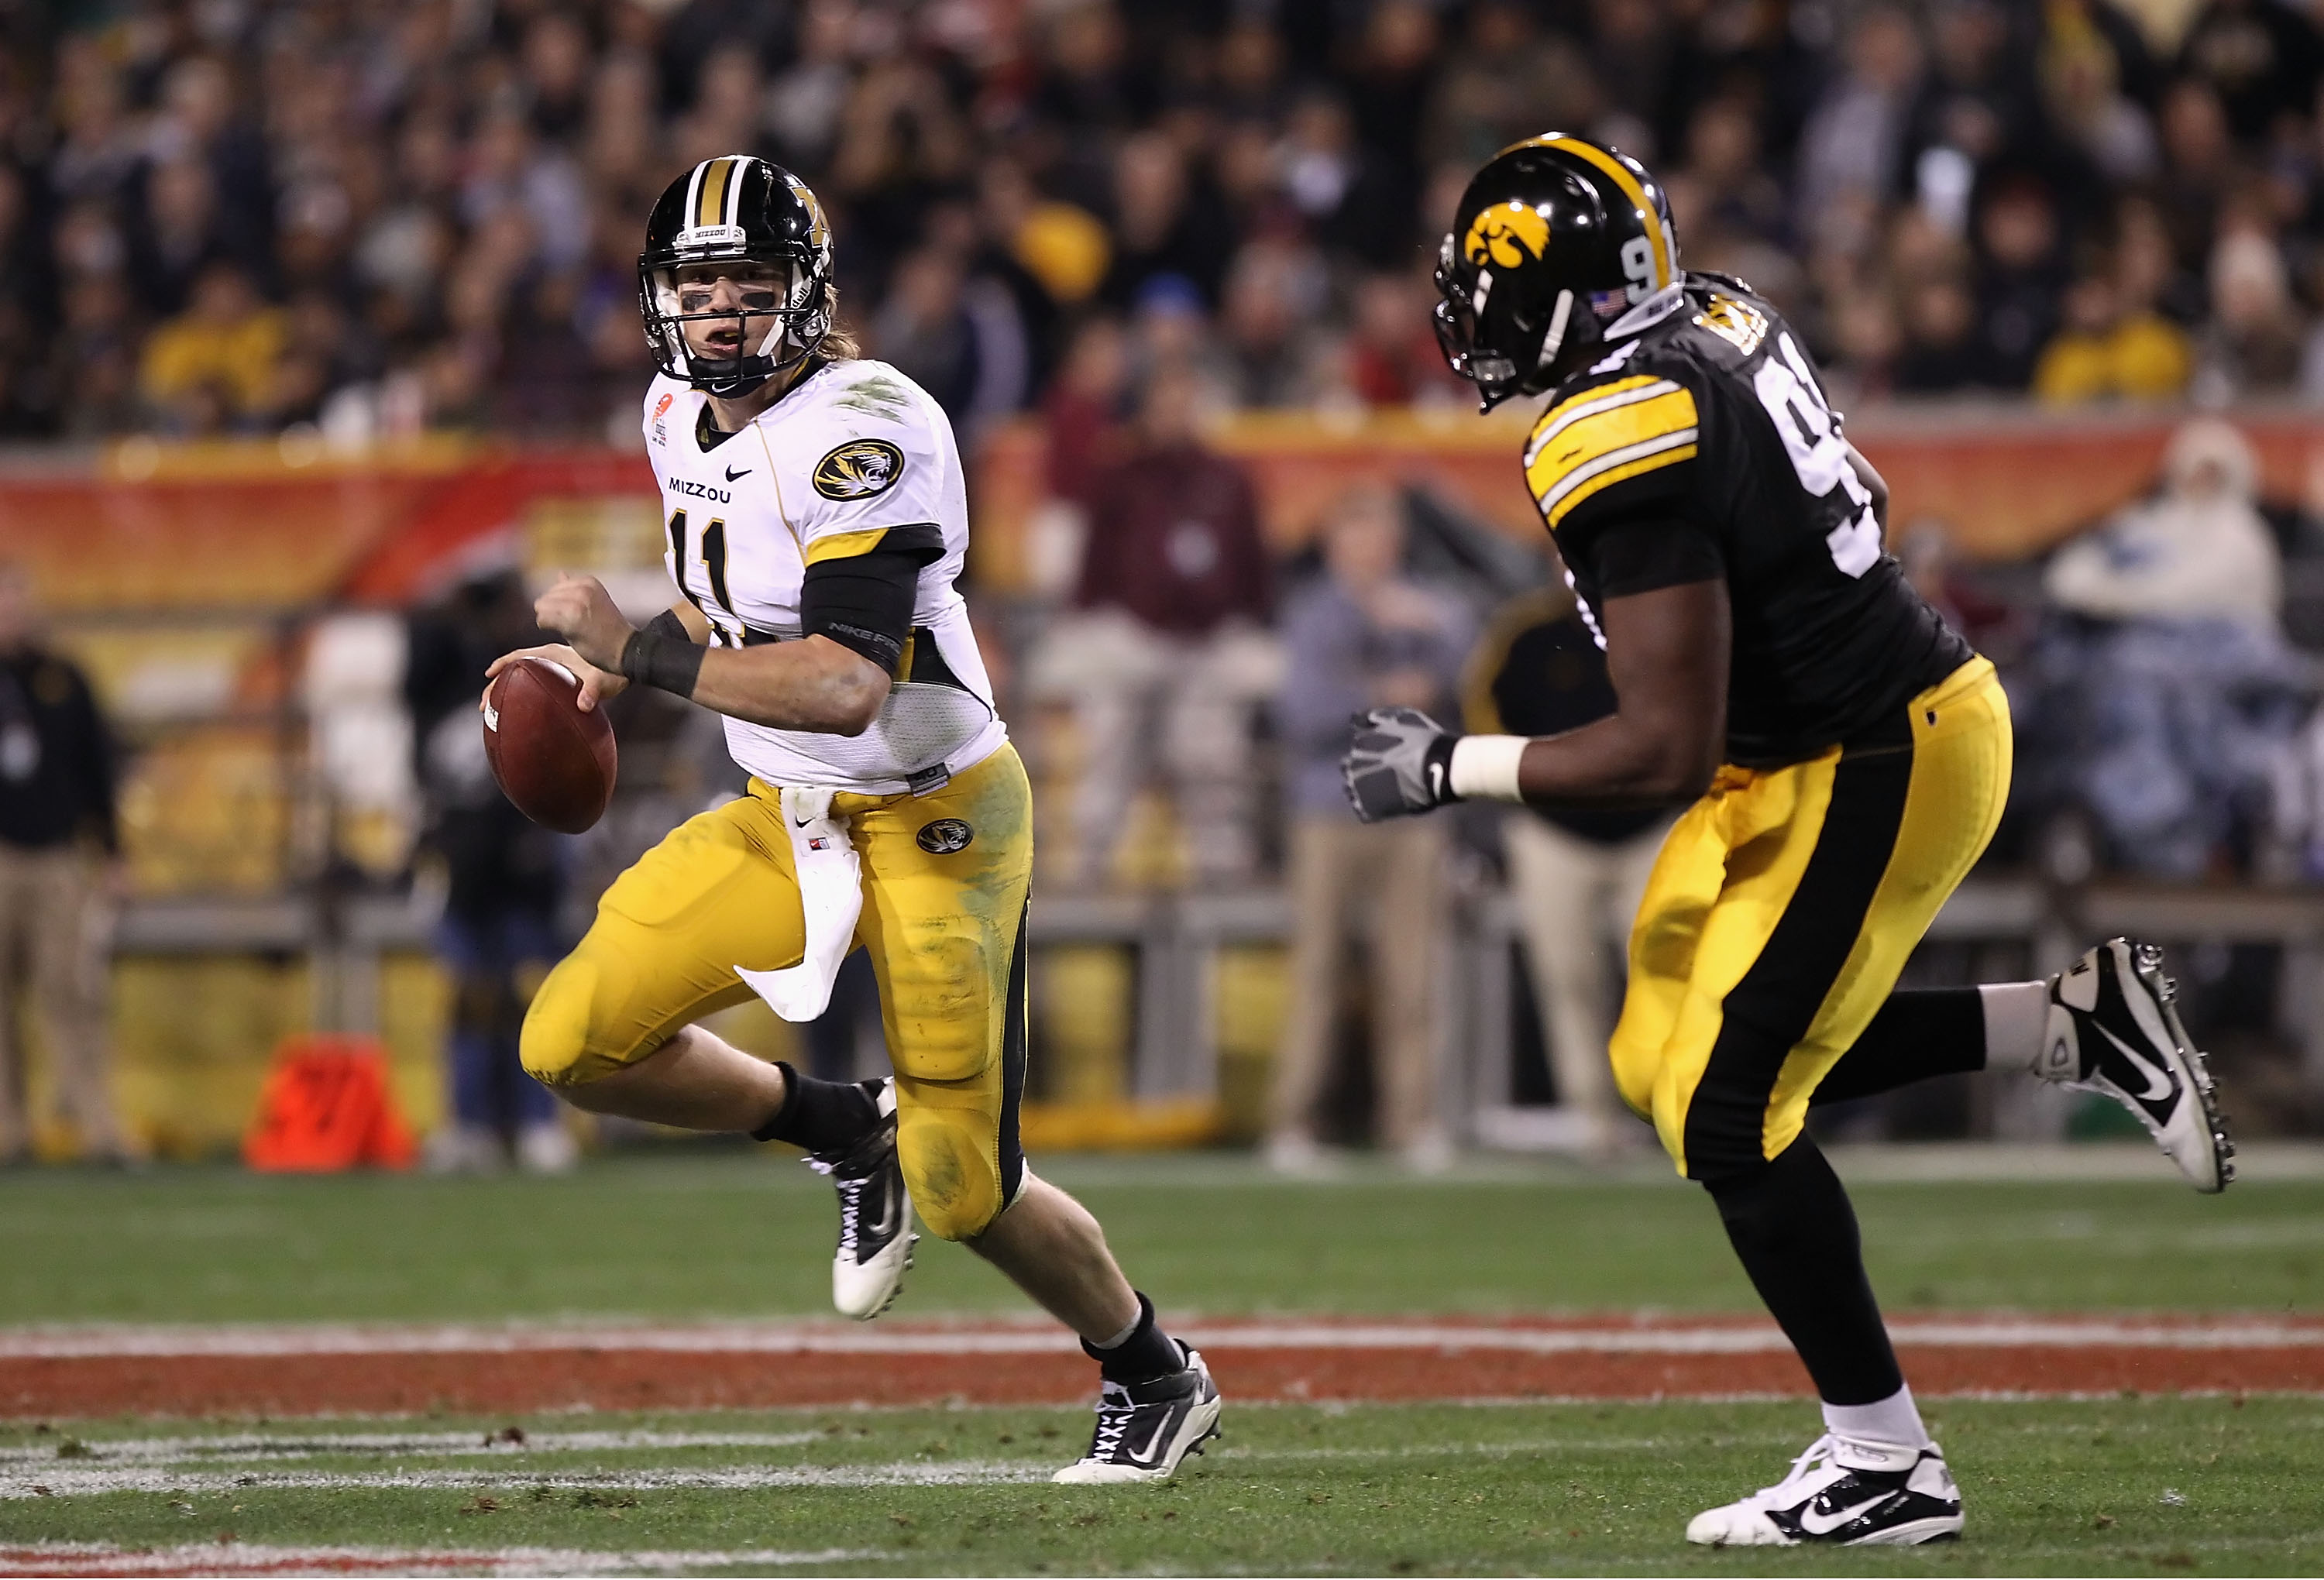 TEMPE, AZ - DECEMBER 28:  Quarterback Blaine Gabbert #11 of the Missouri Tigers drops back to pass during the Insight Bowl against the Iowa Hawkeyes  at Sun Devil Stadium on December 28, 2010 in Tempe, Arizona.  The Hawkeyes defeated the Tigers 27-24.  (P